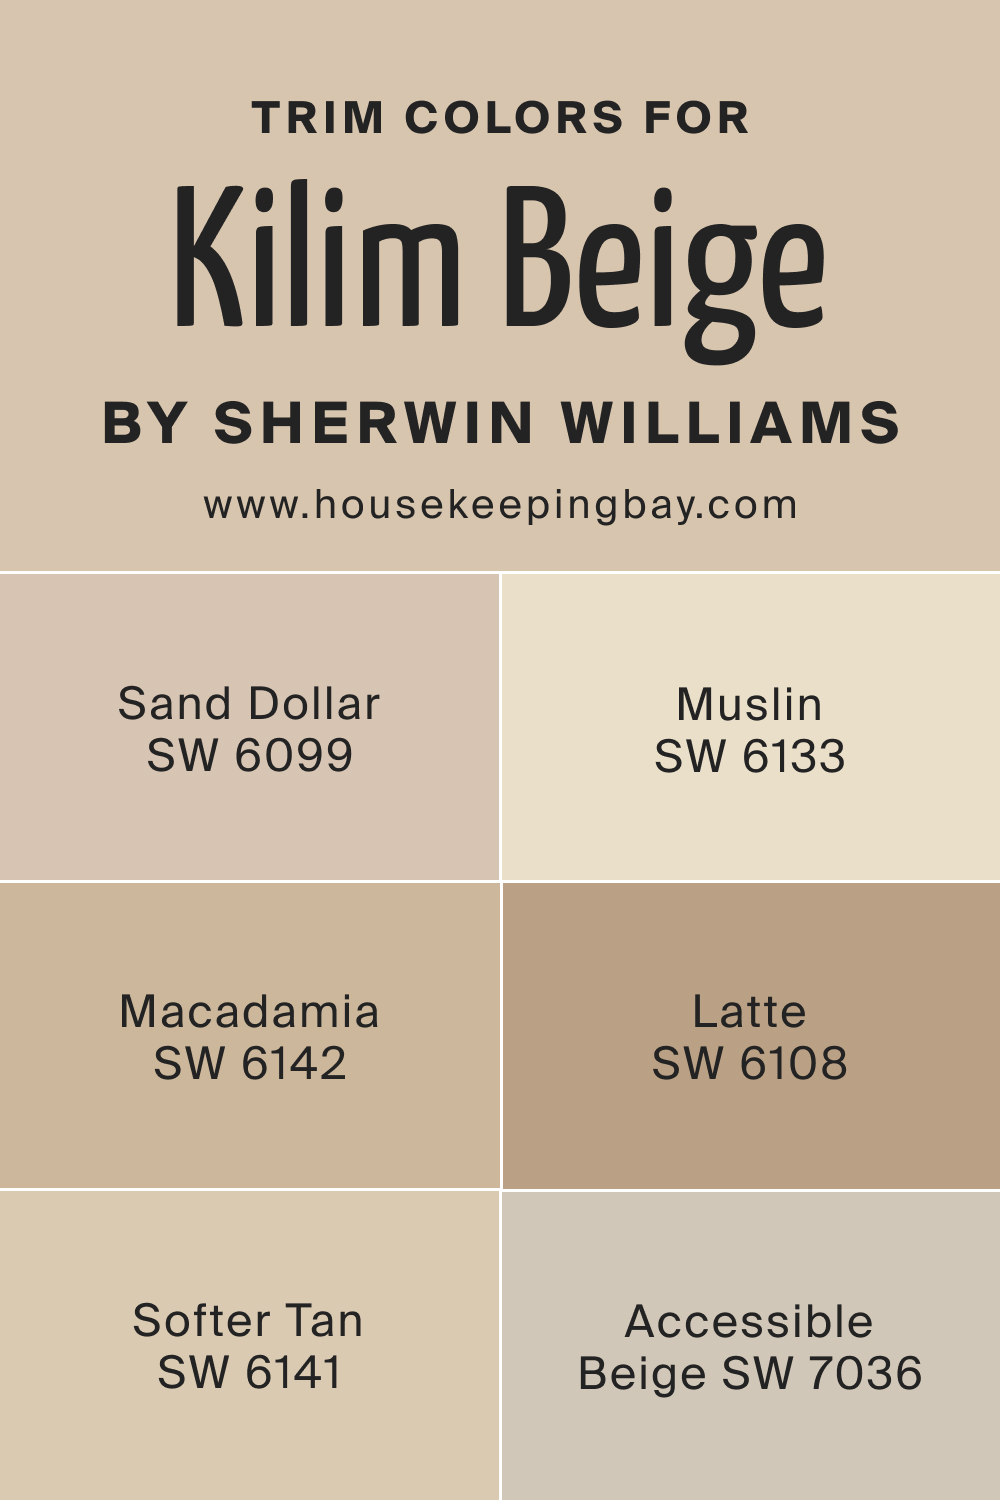 What Is the Best Trim Color to Use With SW Kilim Beige